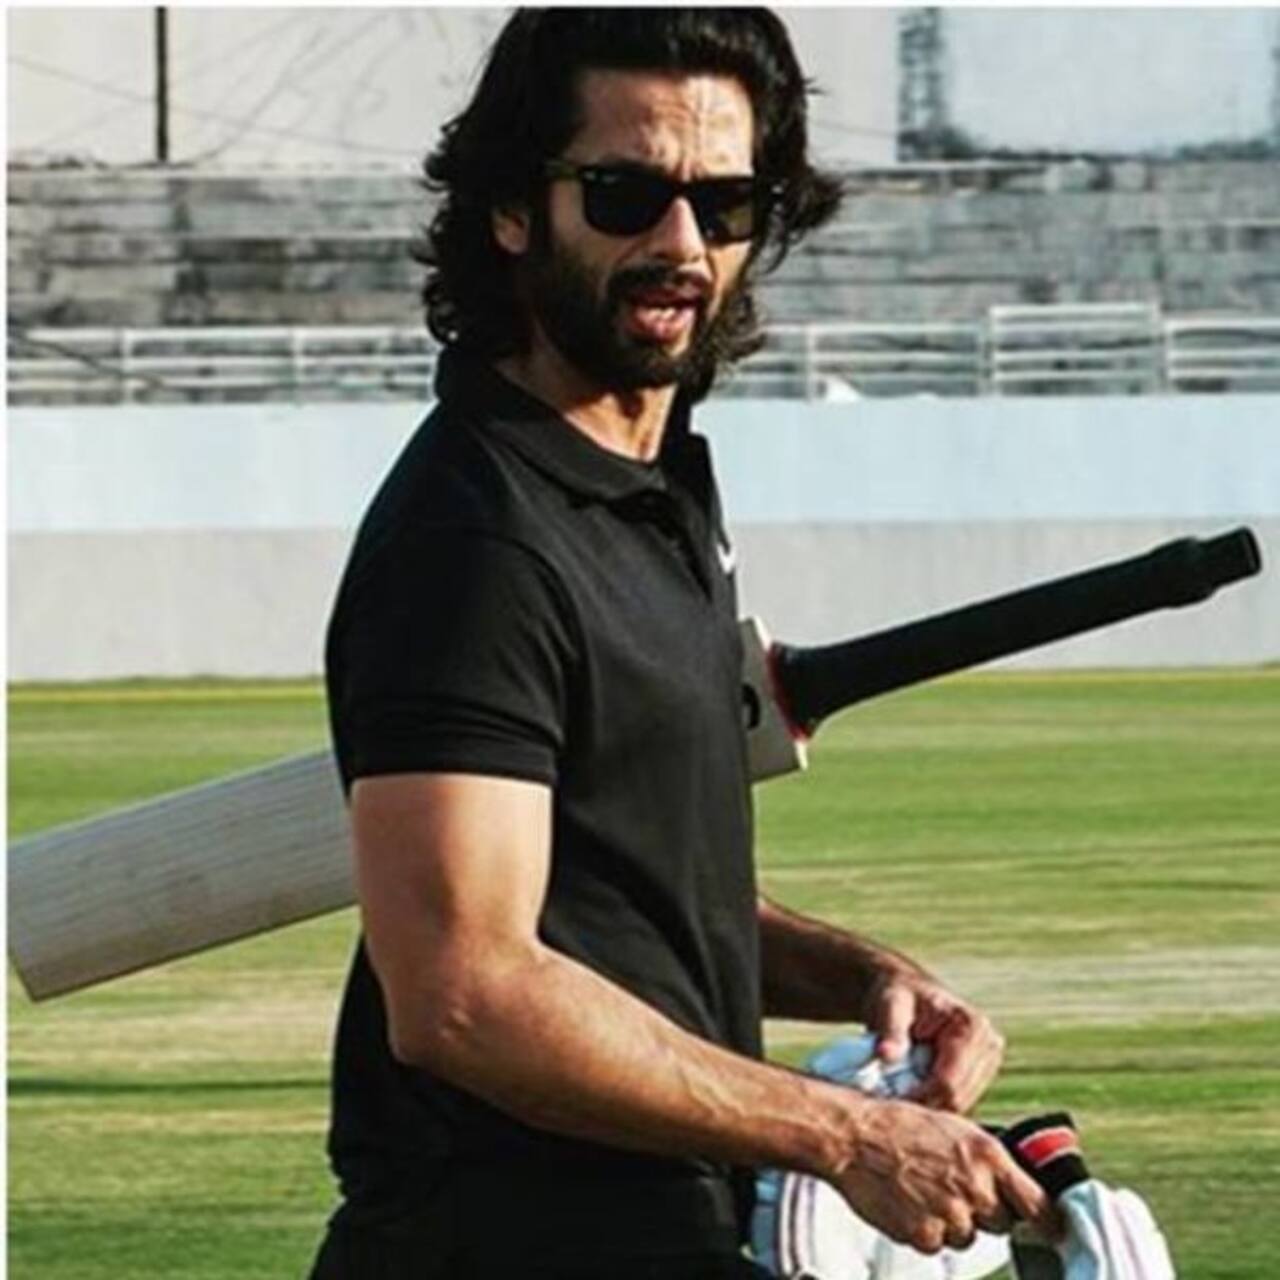 Jersey: Shahid Kapoor reveals he approached everybody 'like a beggar' after doing a blockbuster like Kabir Singh